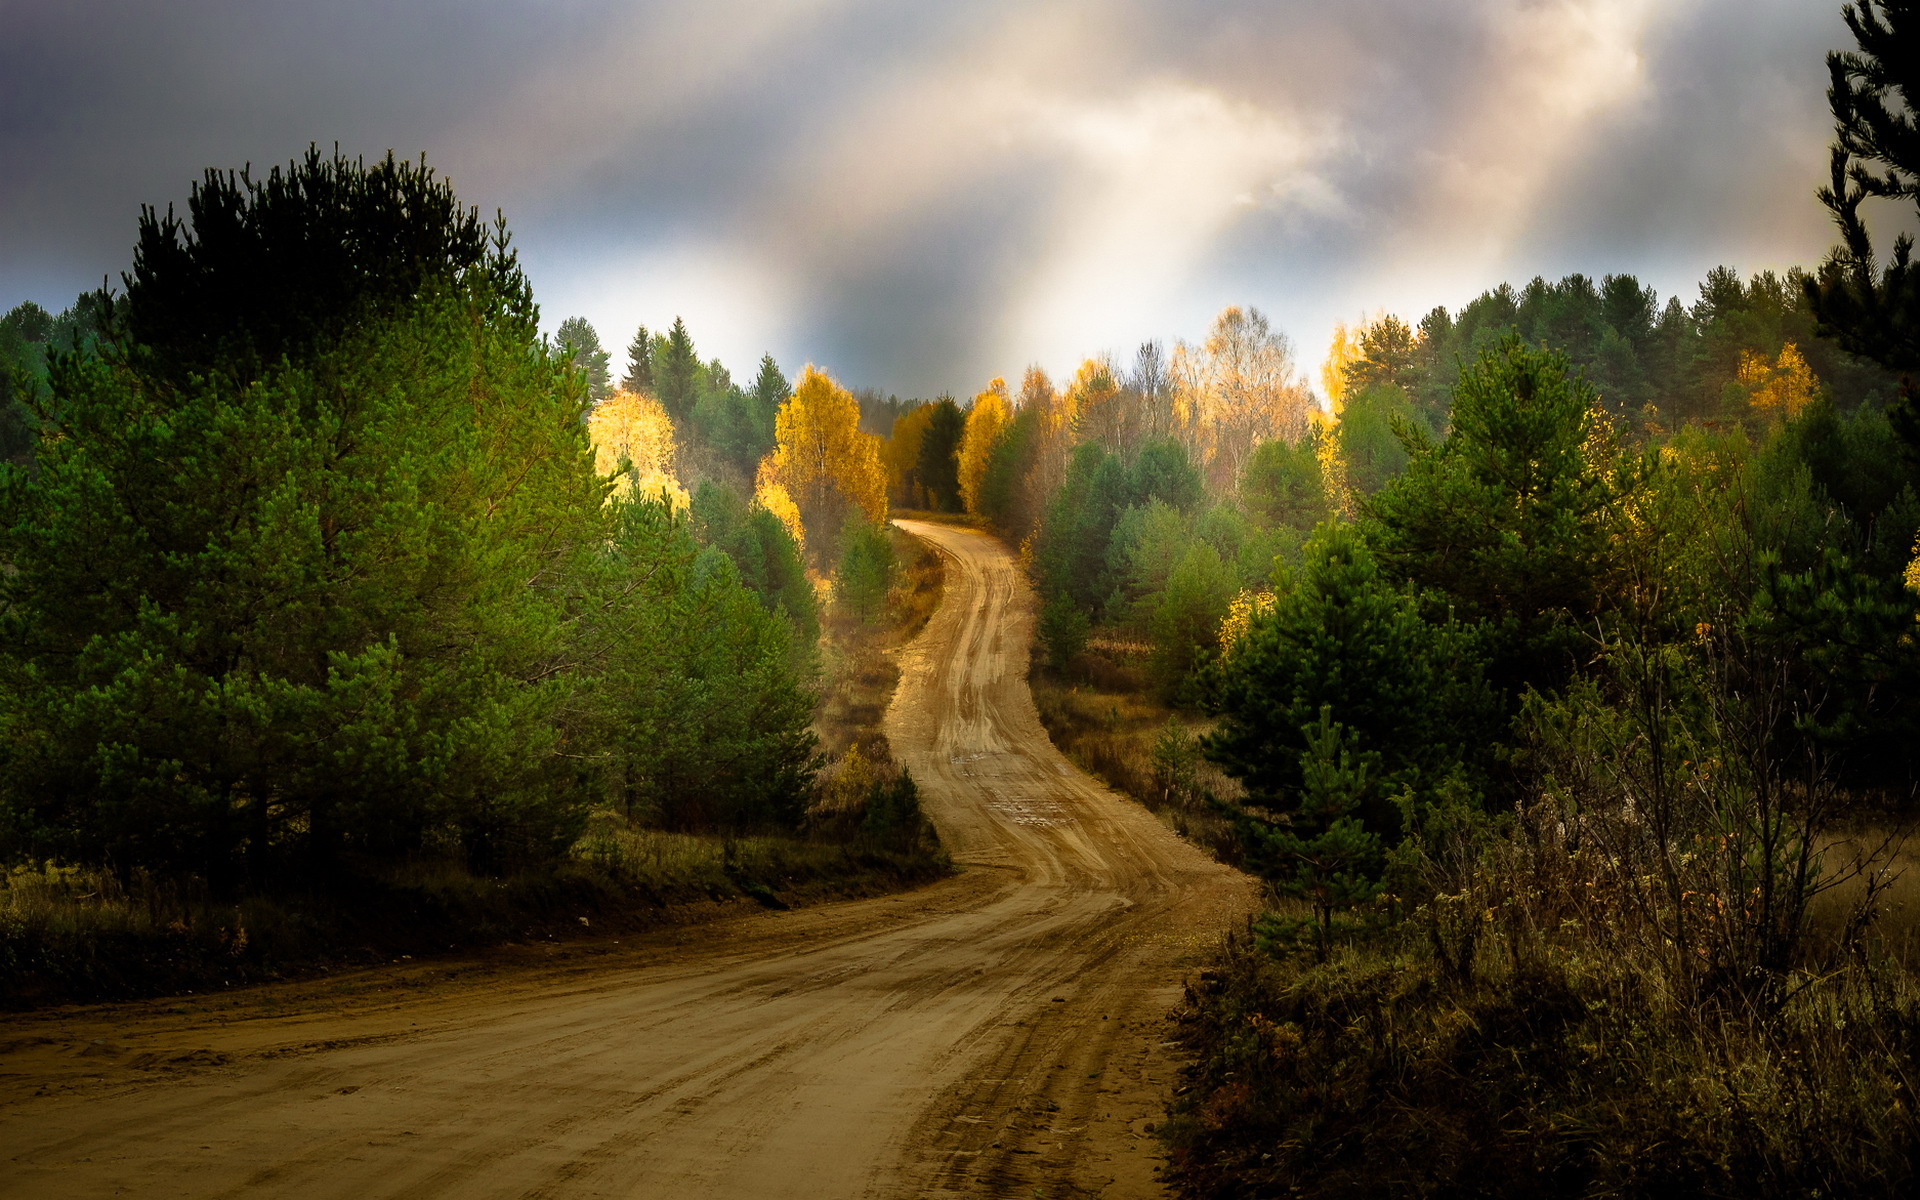 man made, road, country, dirt road, tree